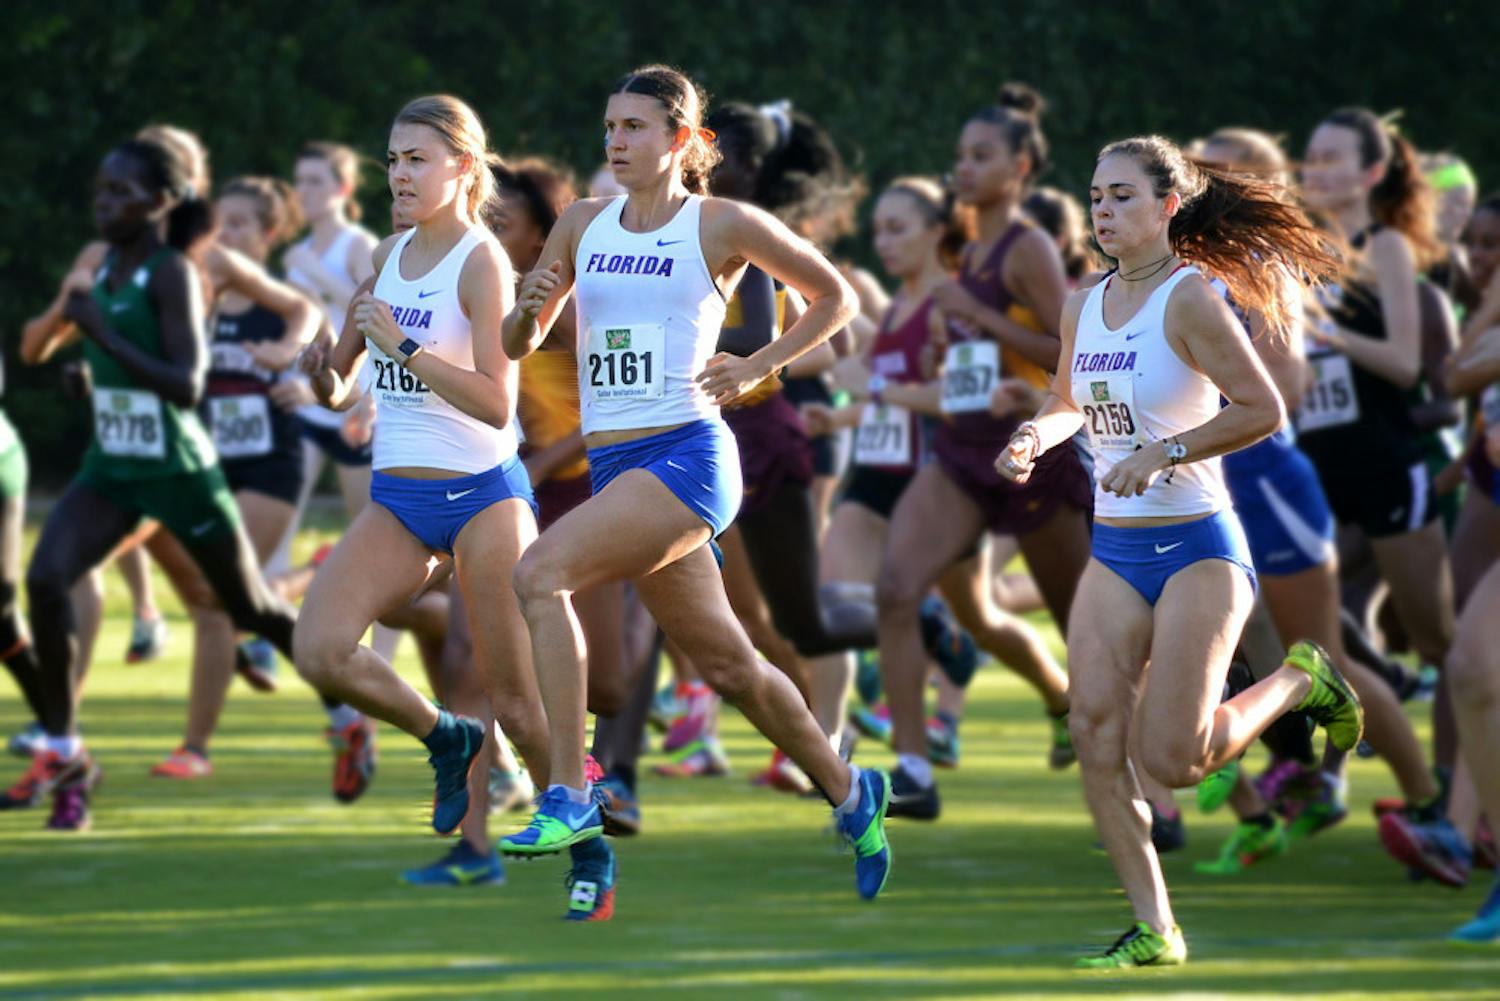 UF's women's cross country team won its fifth straight Mountain Dew Invitational Saturday morning in Gainesville.